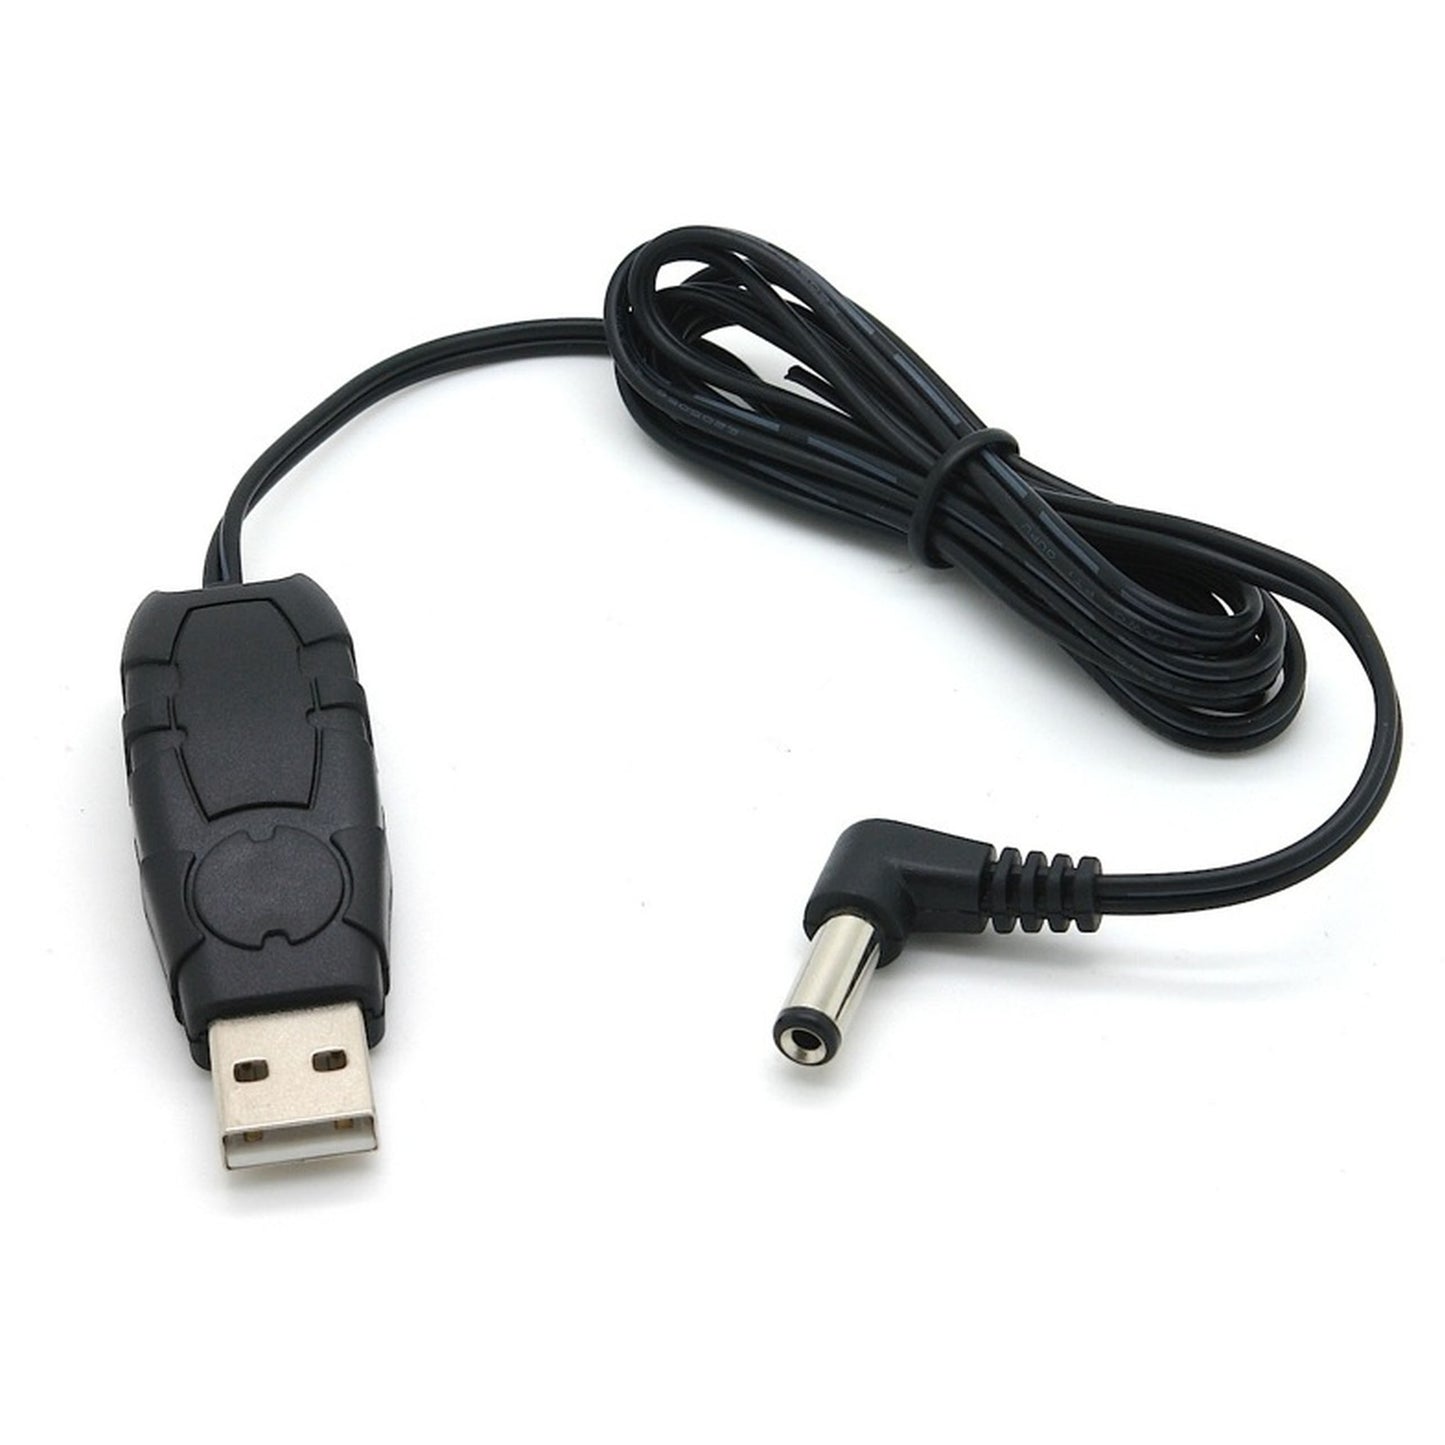 USB Adapter for MagBound®